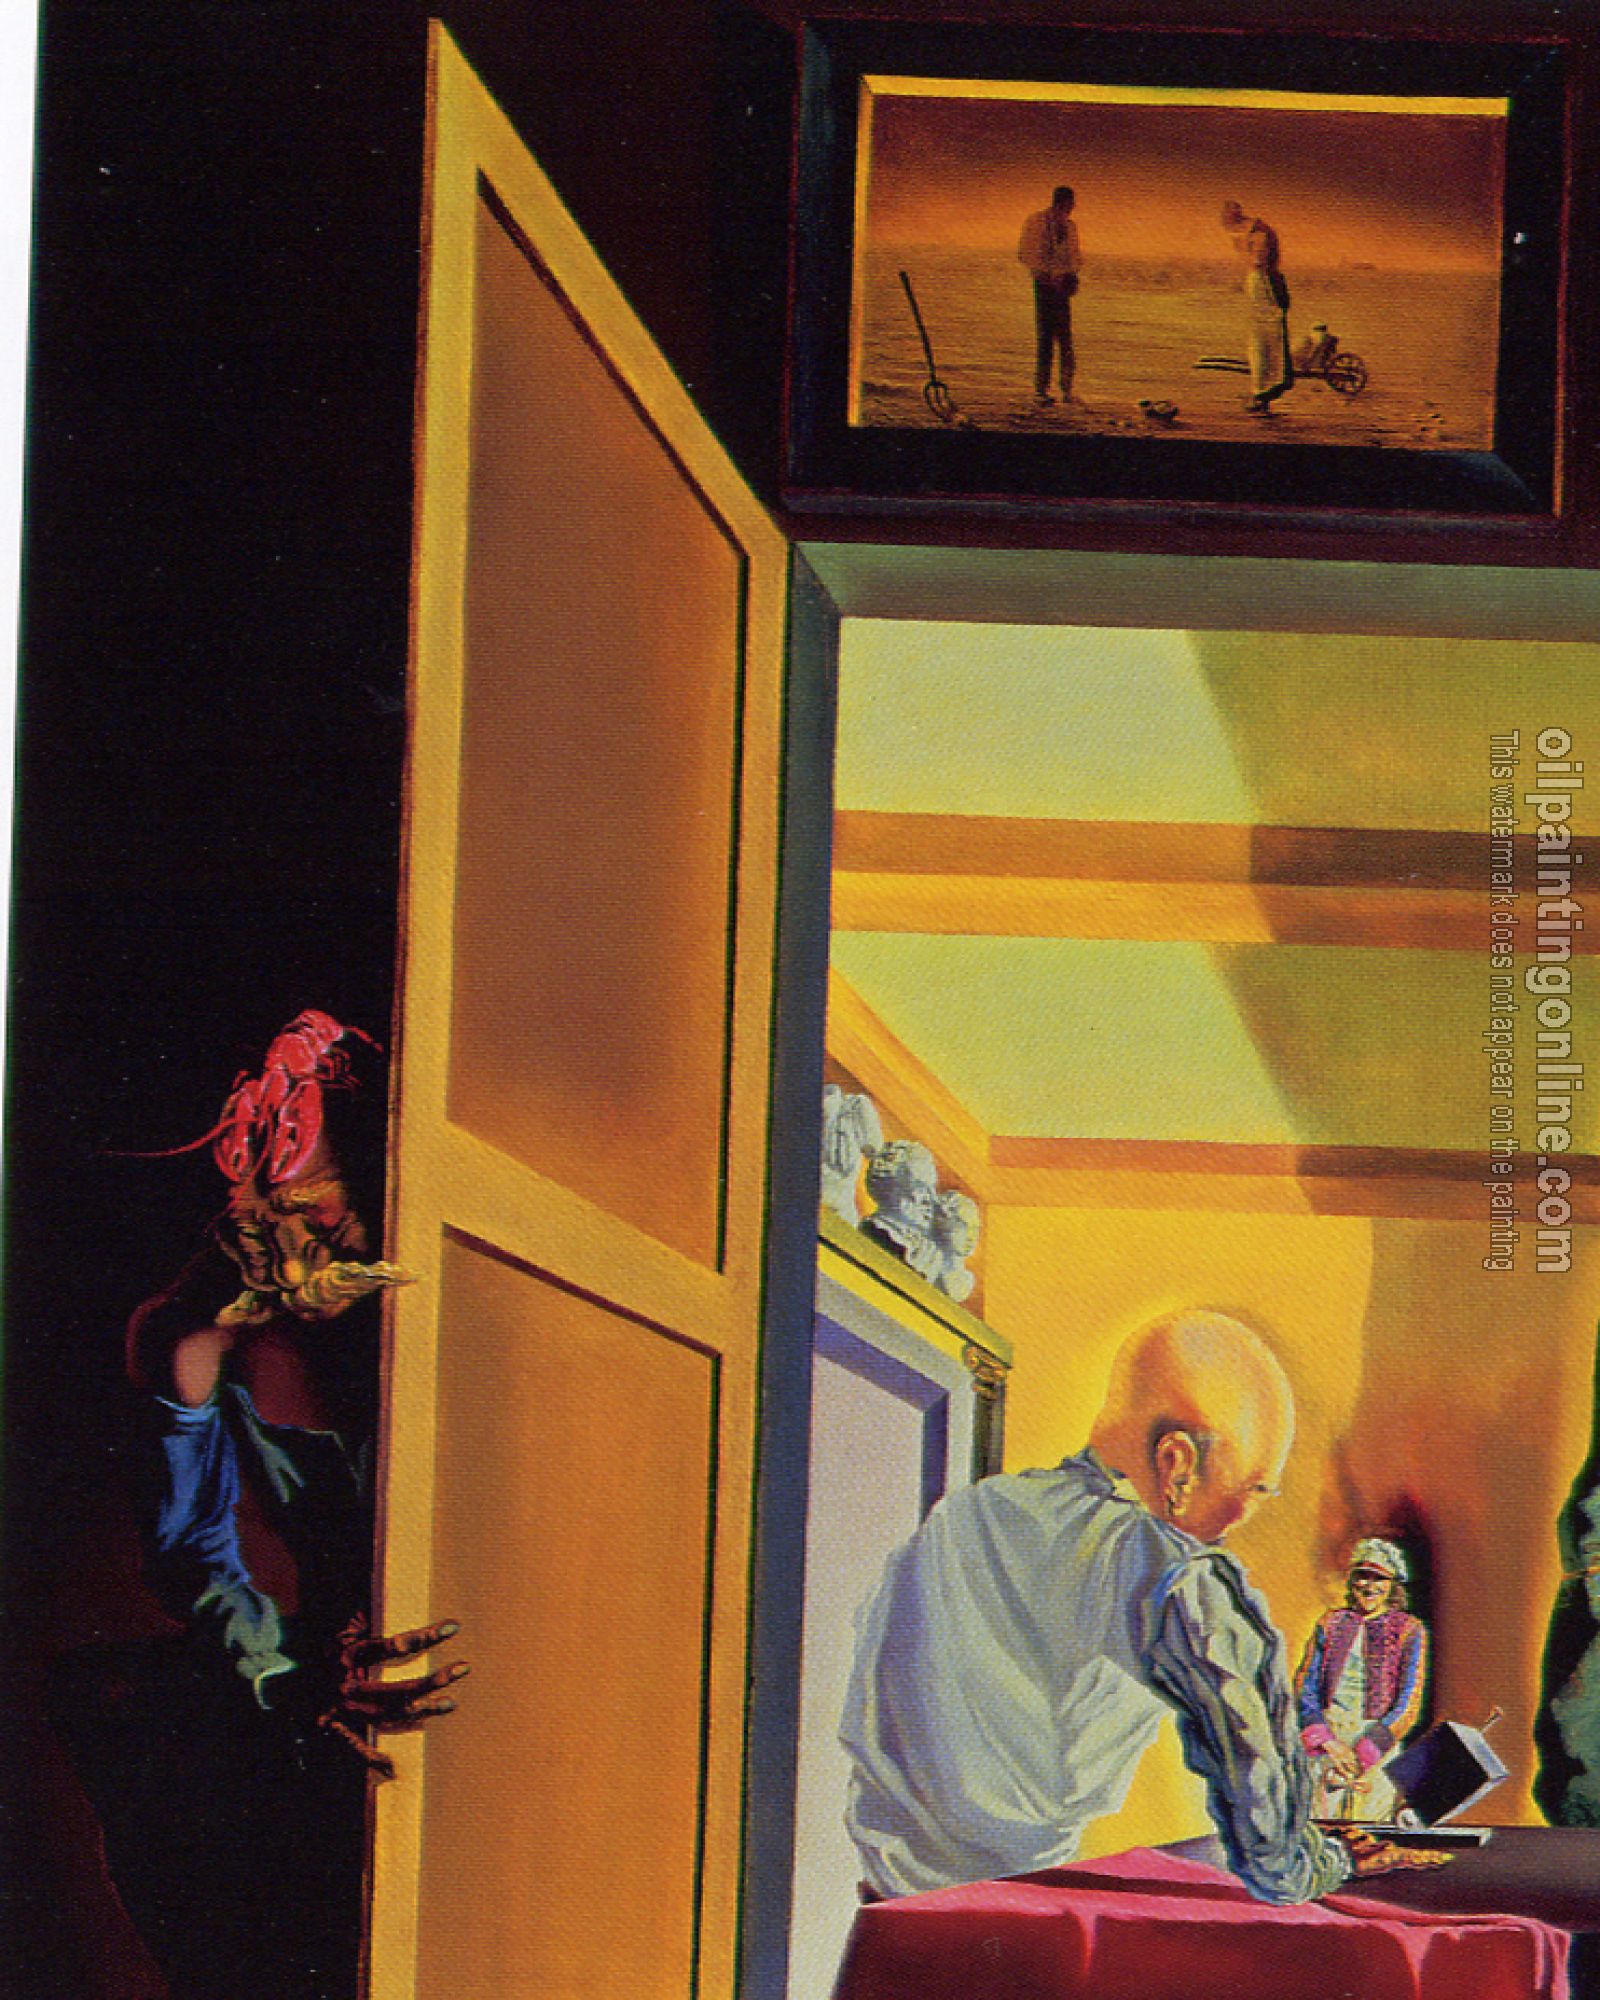 Dali, Salvador - Gala and the Angelus of Millet Preceding the Imminent Arrival of the Conica Anamorphoses